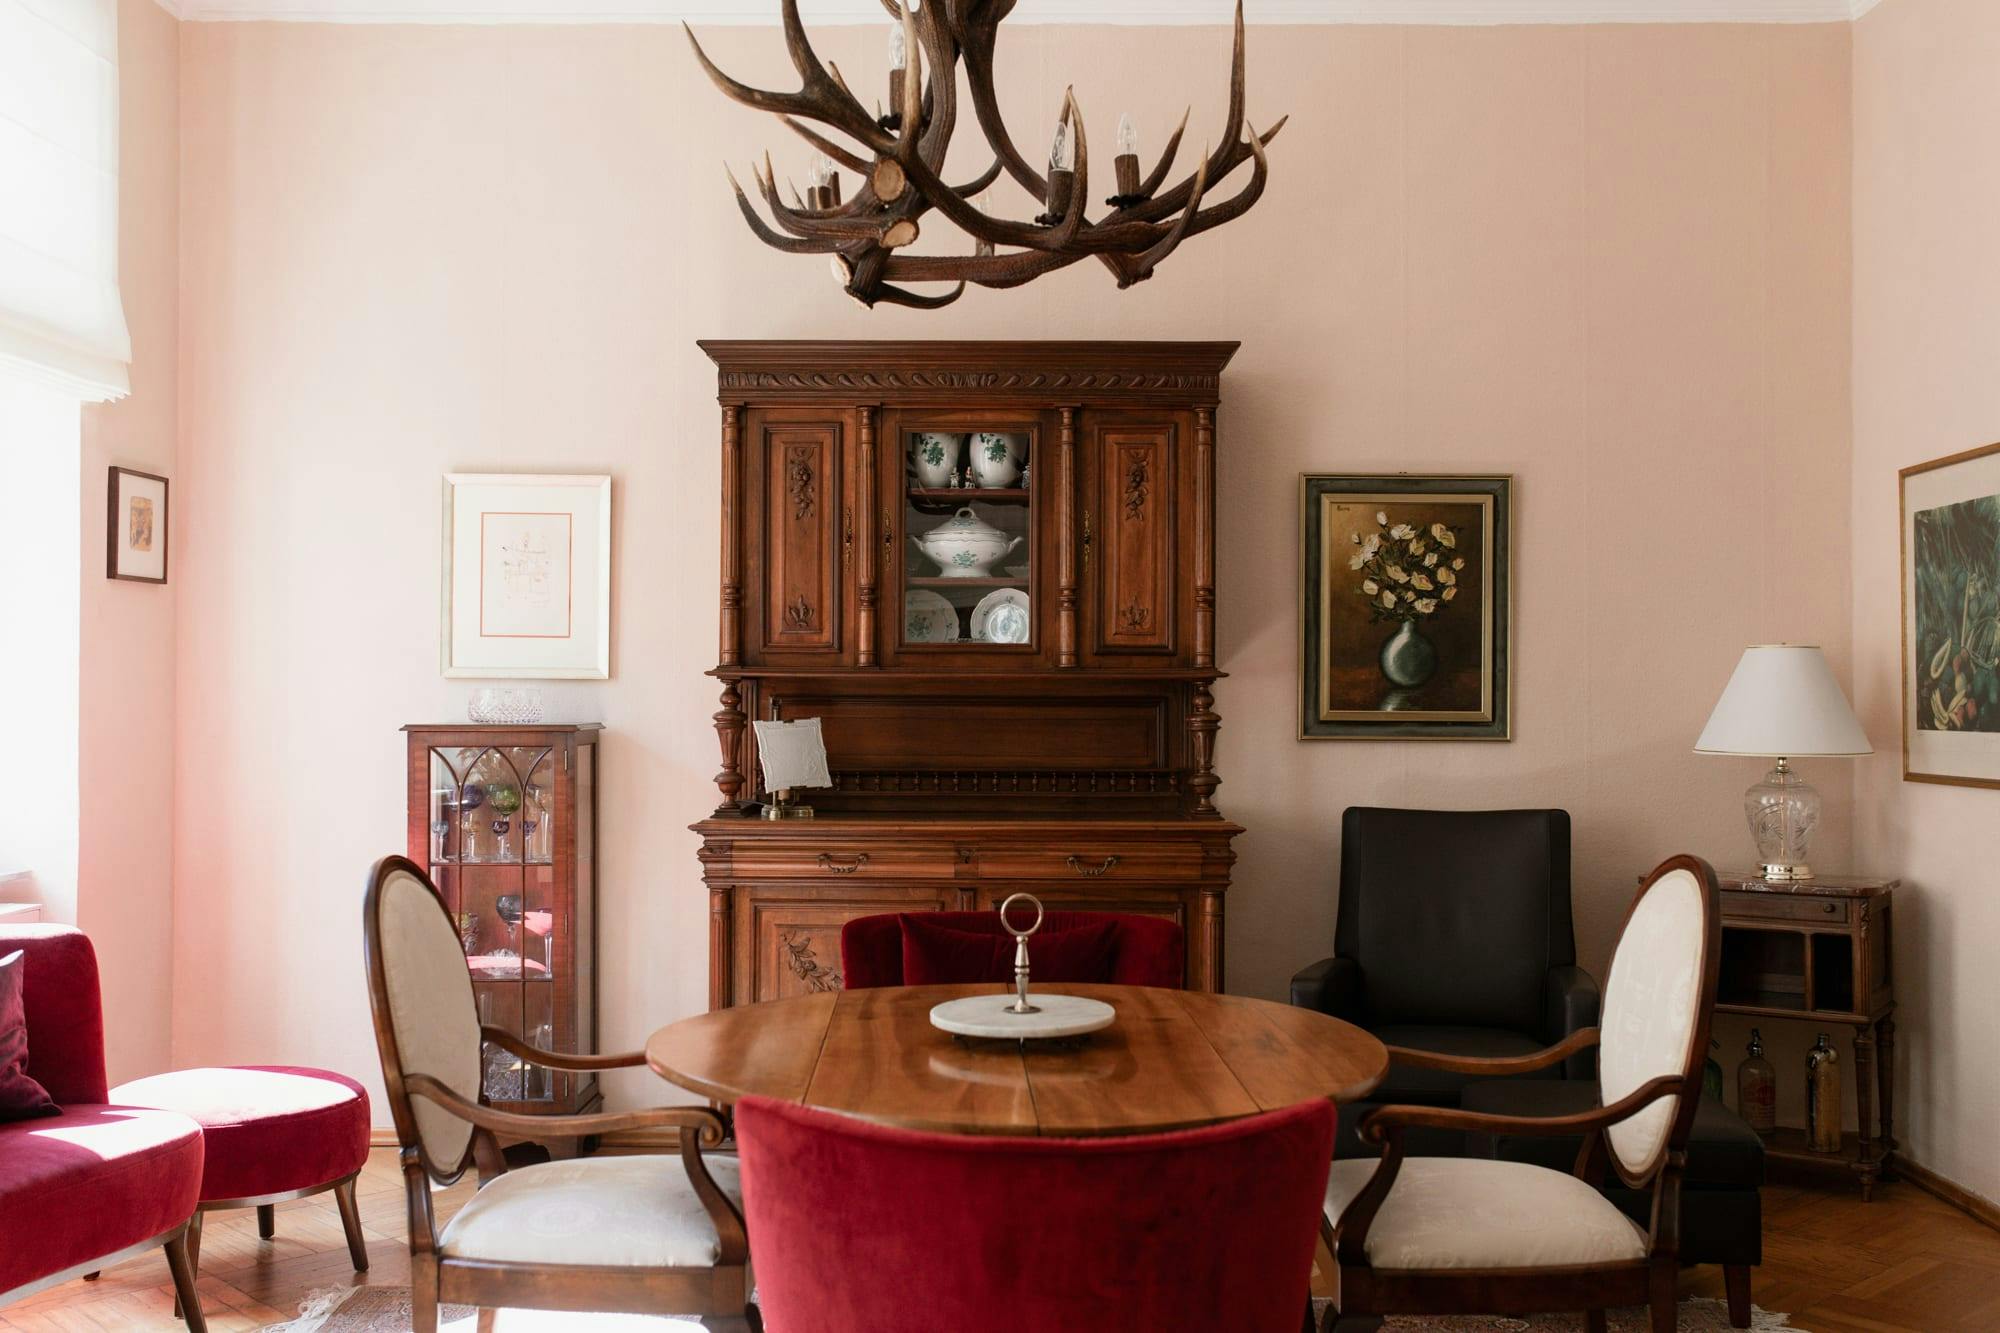 The image features a cozy living room with a wooden dining table, chairs, a TV, and a large antler chandelier.